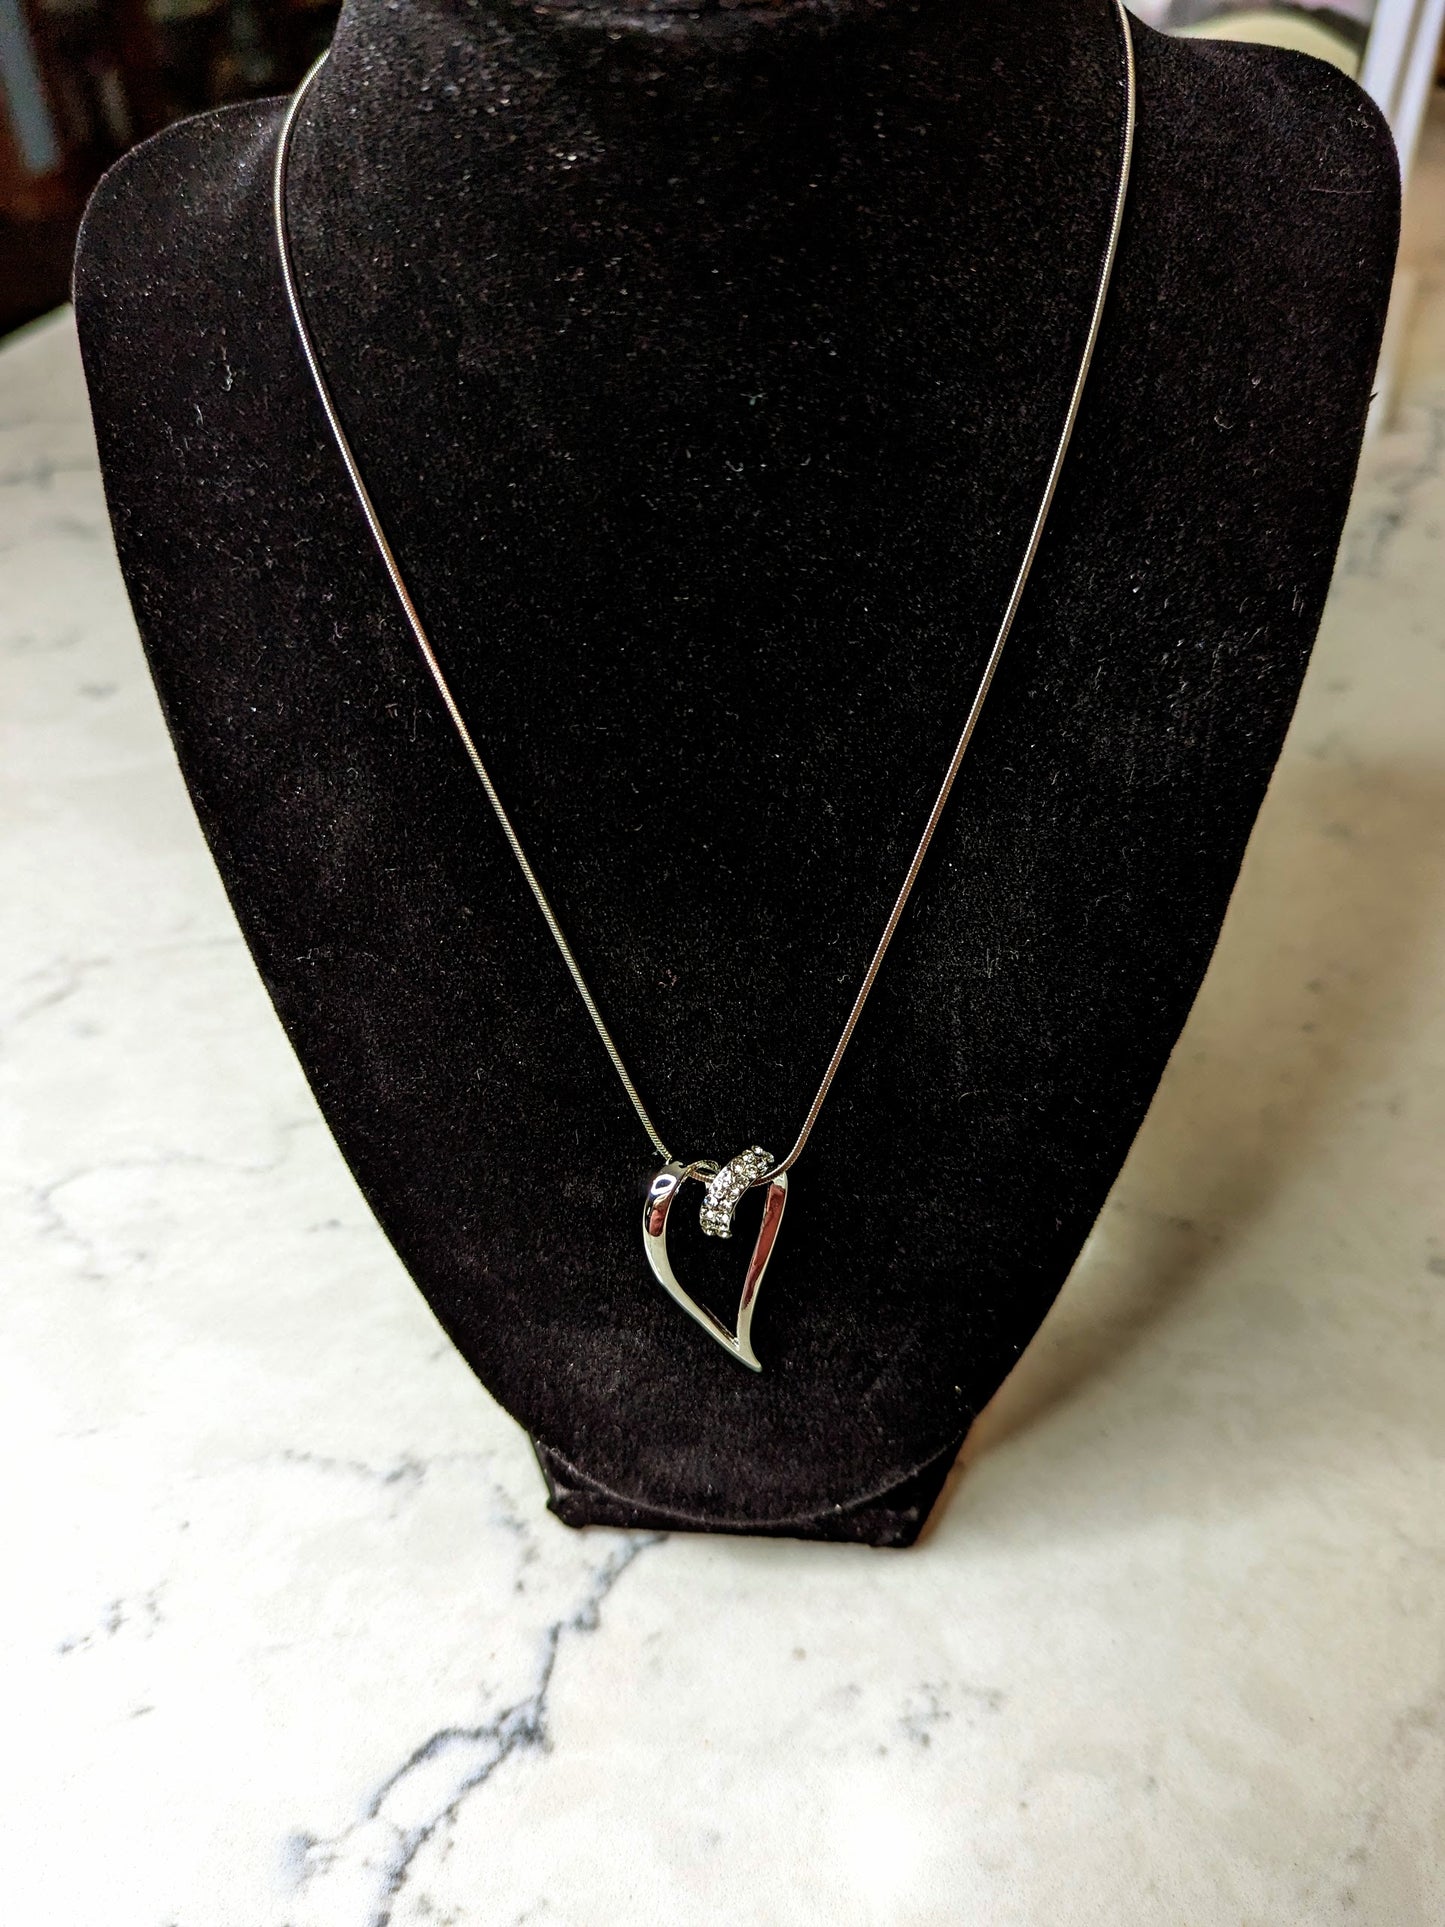 Large Heart Necklace with Crystals White Gold Plated